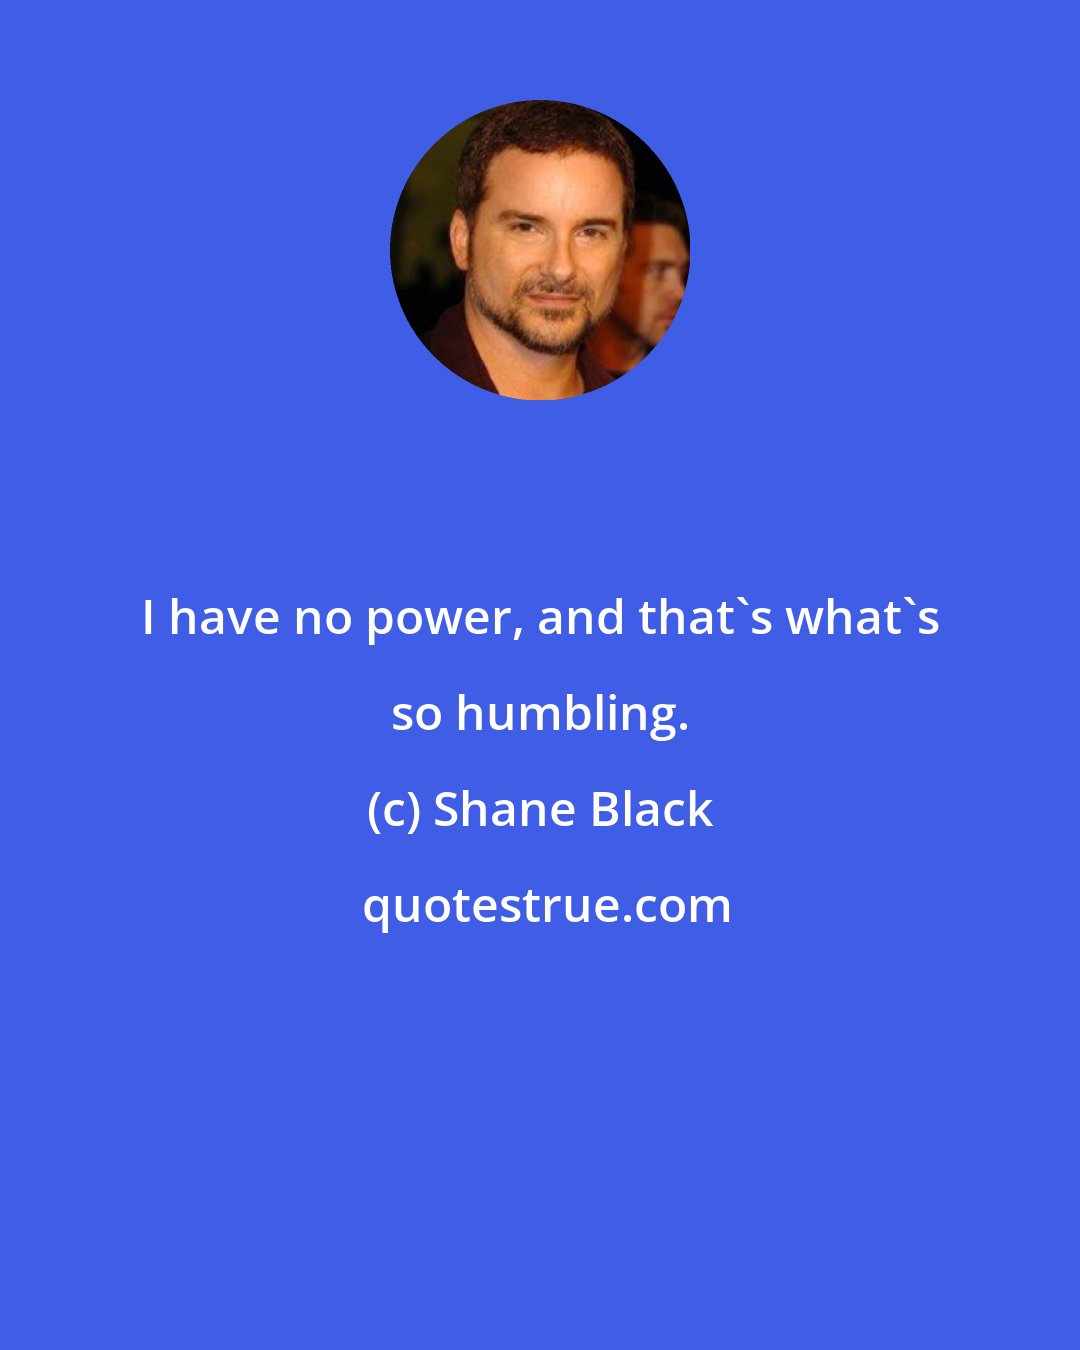 Shane Black: I have no power, and that's what's so humbling.